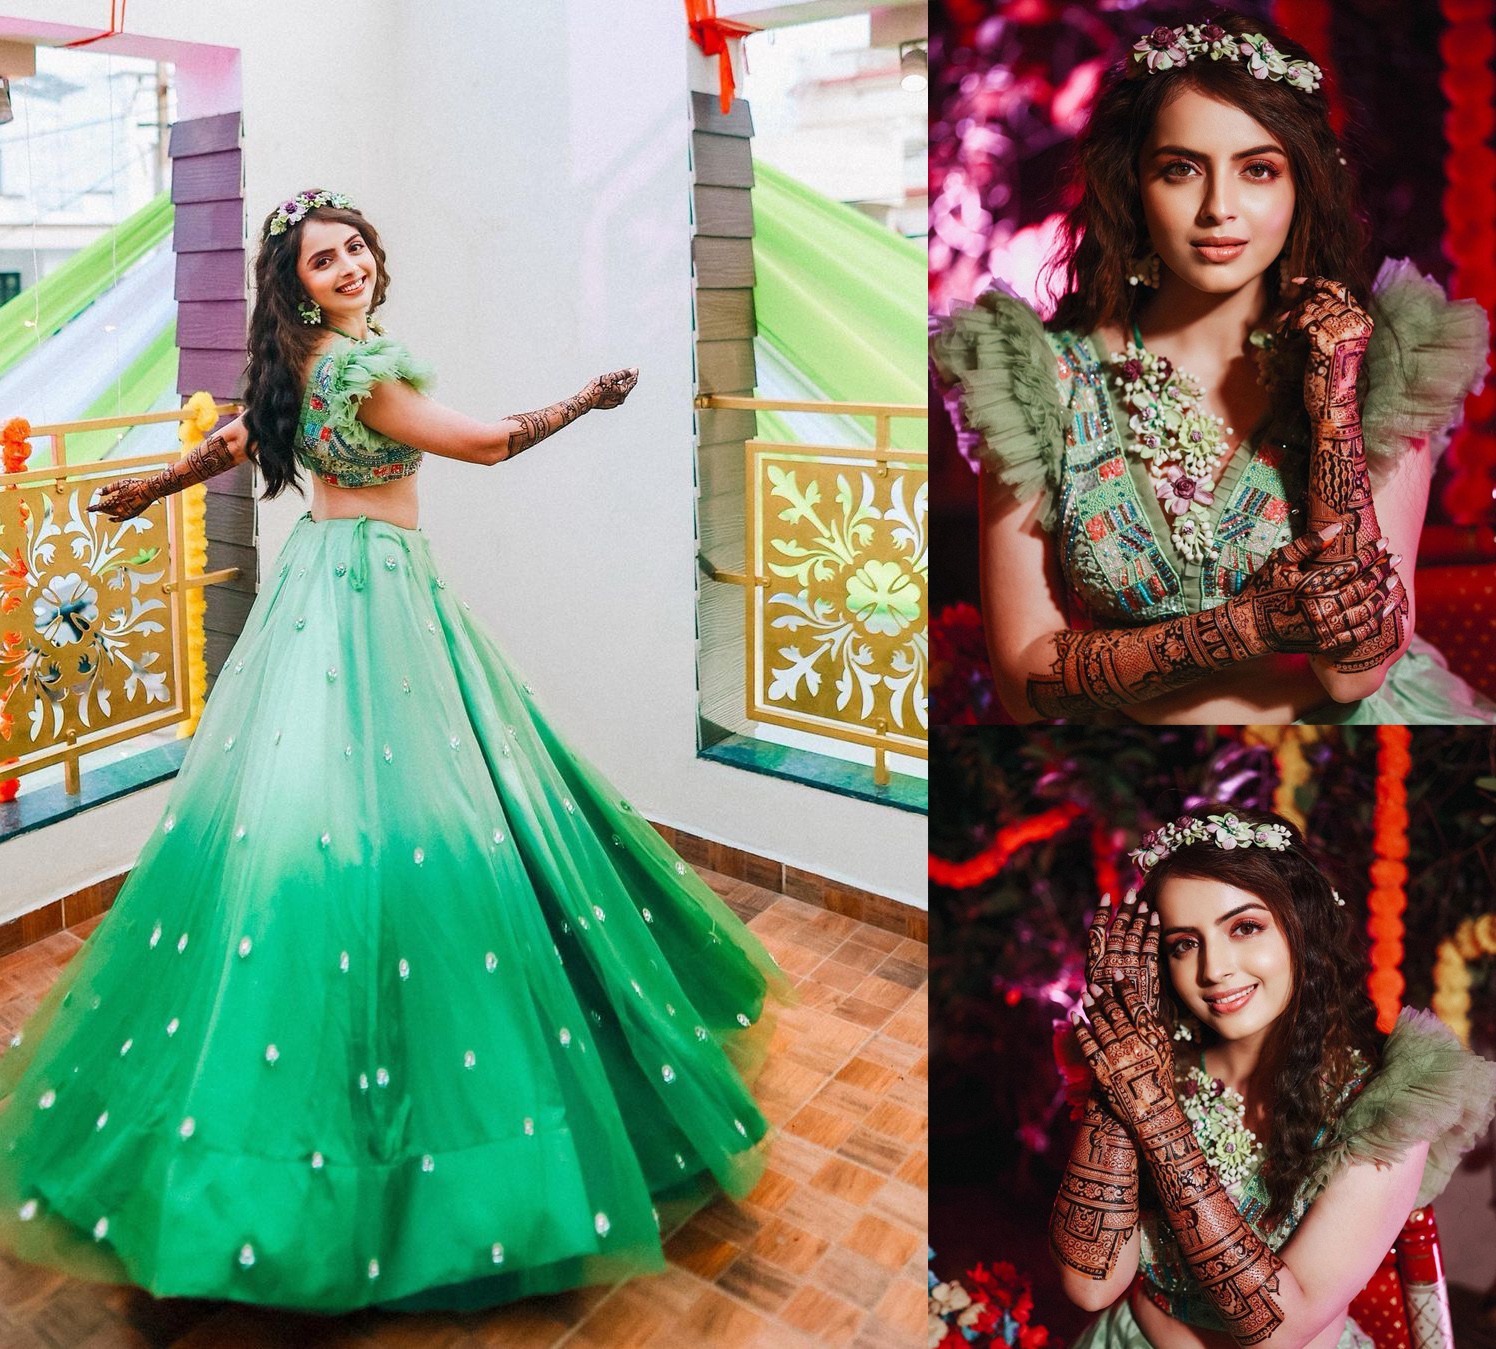 Gorgeous Actress Shrenu Parikh Looks Ethereal In The Beautiful Green Attrite At Her Mehandi Ceremony! She Shares A Glimpse Of Her Wedding Ceremony!